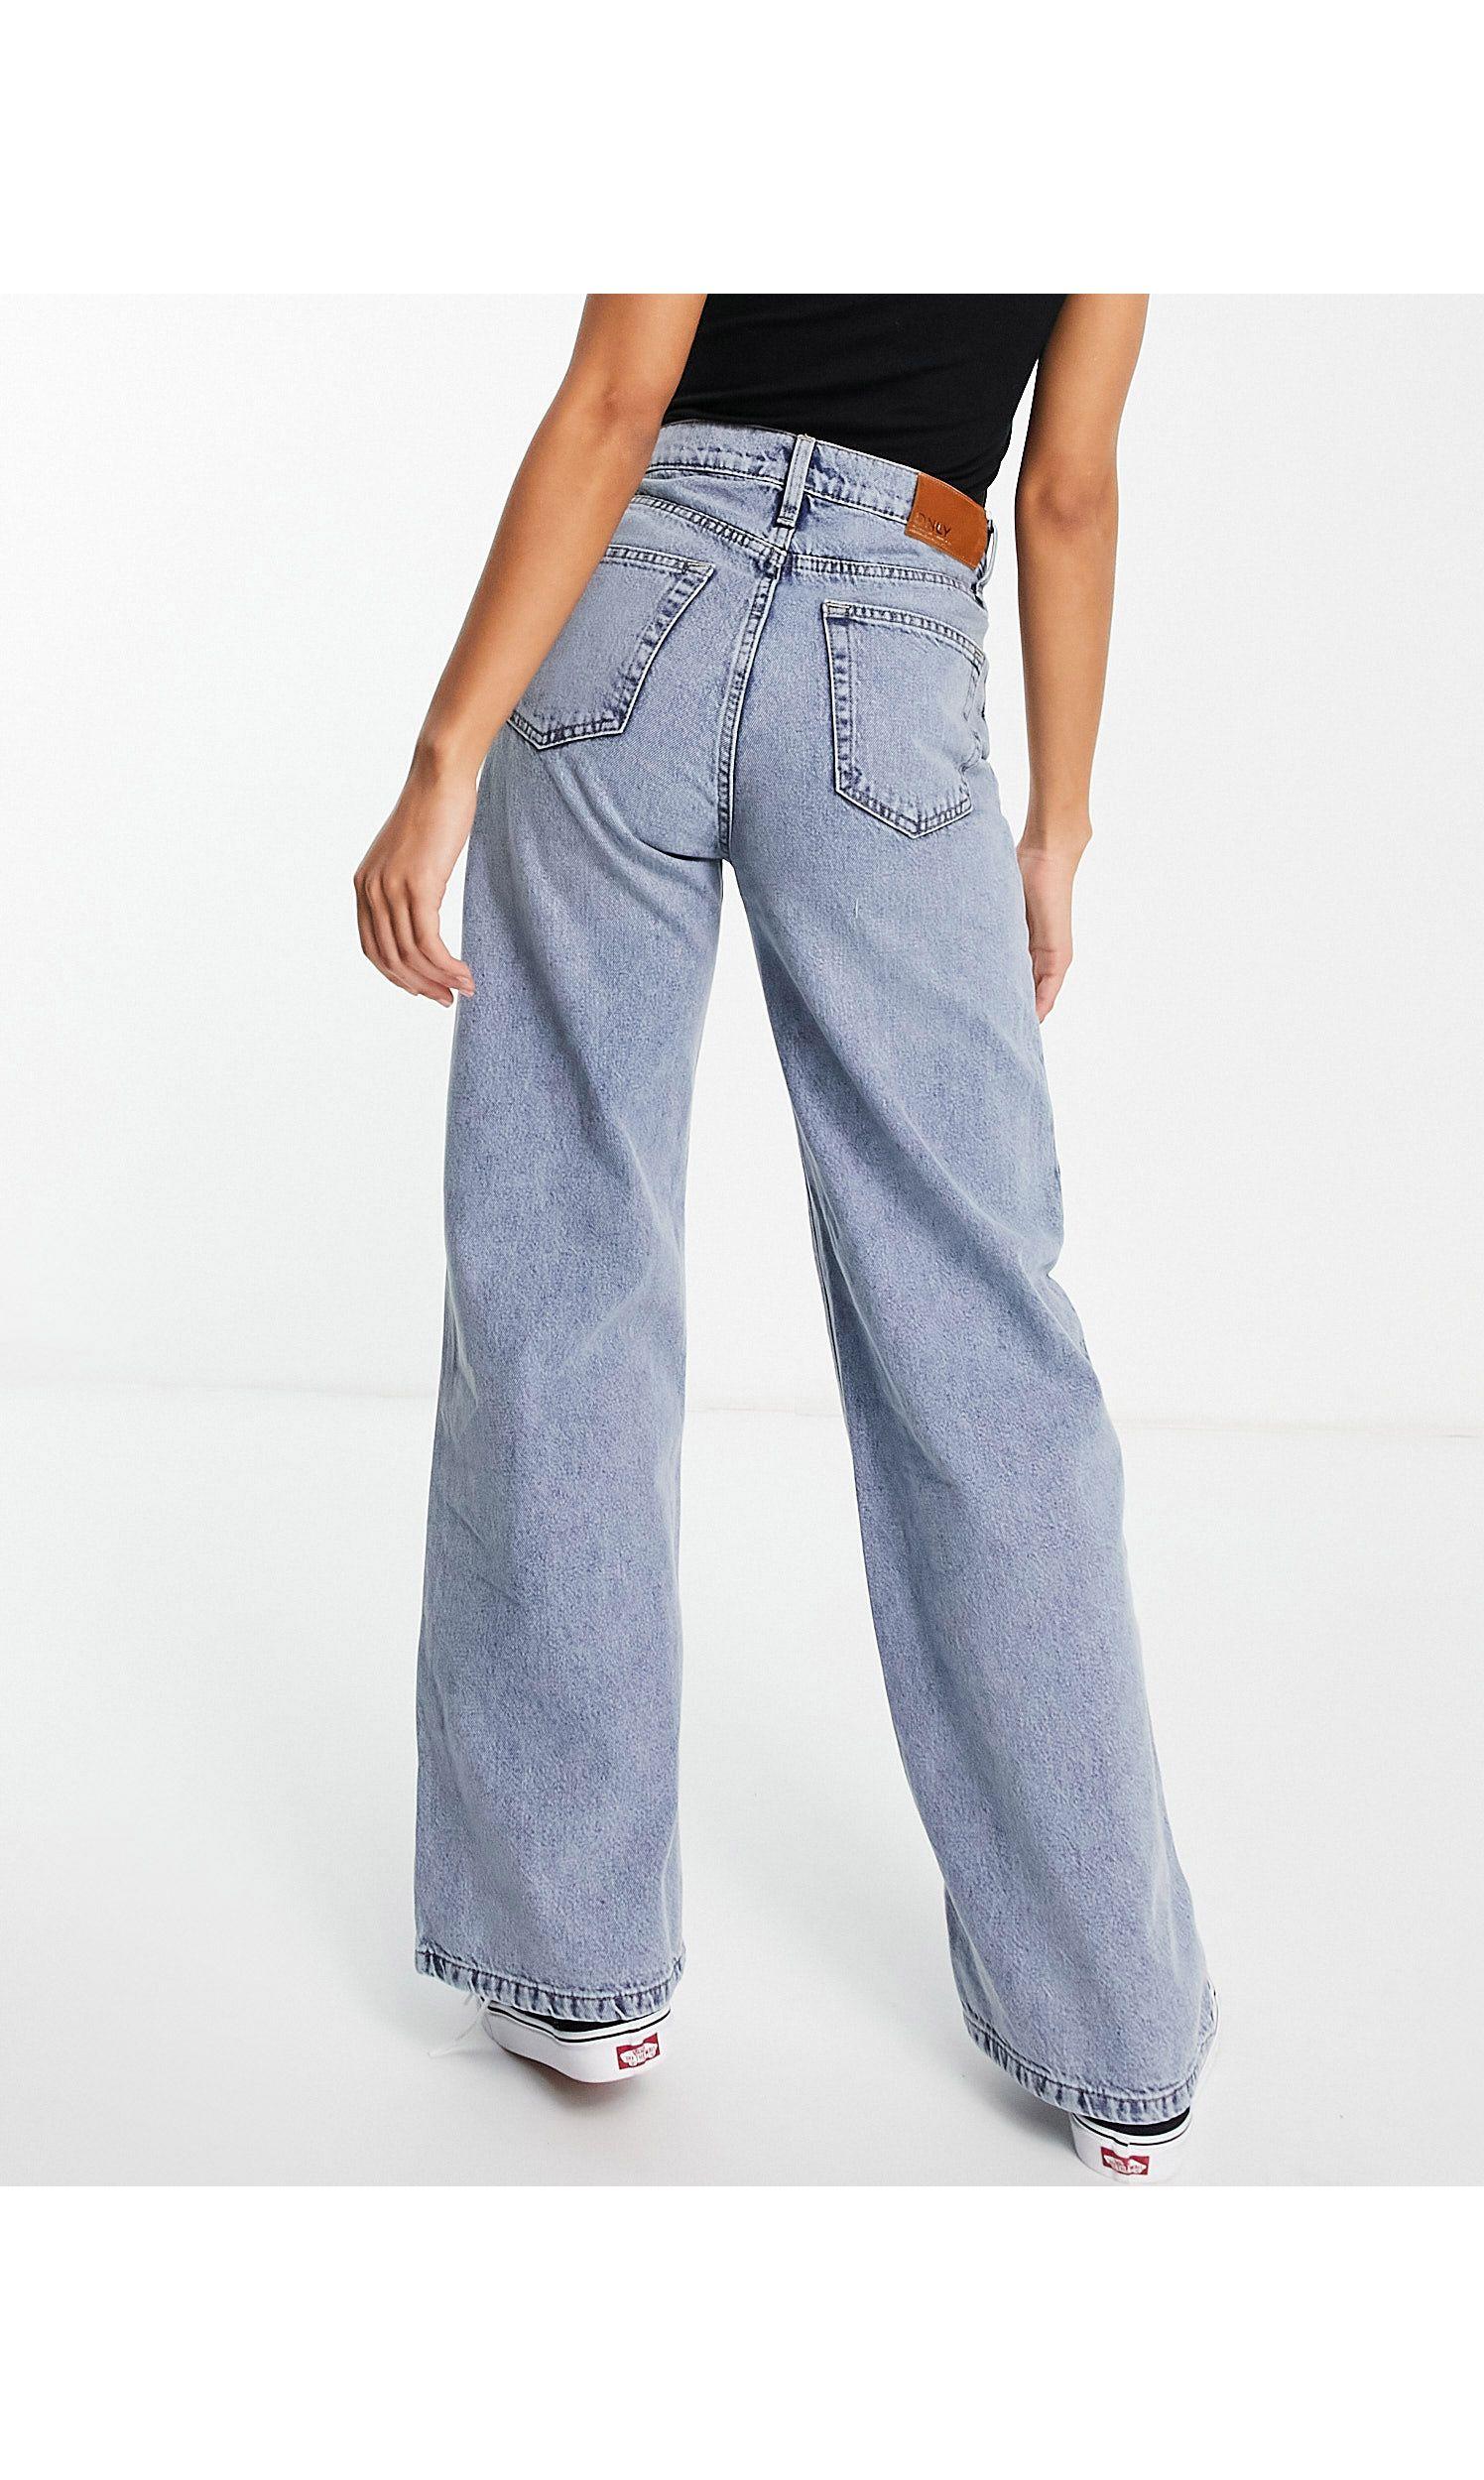 ONLY Denim Hope High Waisted Wide Leg Jeans in Blue - Lyst